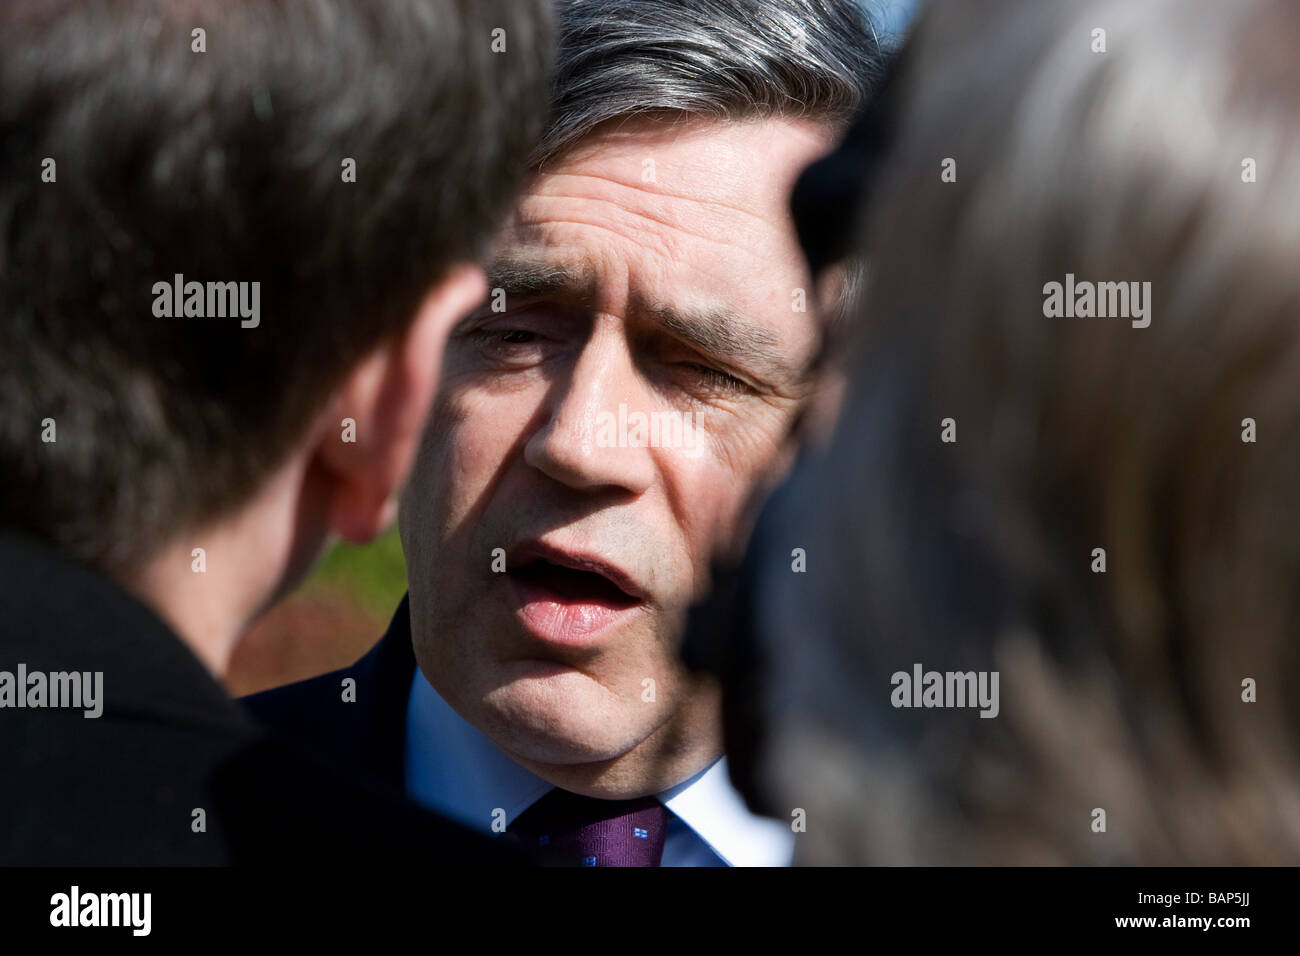 Gordon Brown MP the Prime Minister and former Chancellor of the Exchequer in the Labour British Government Stock Photo